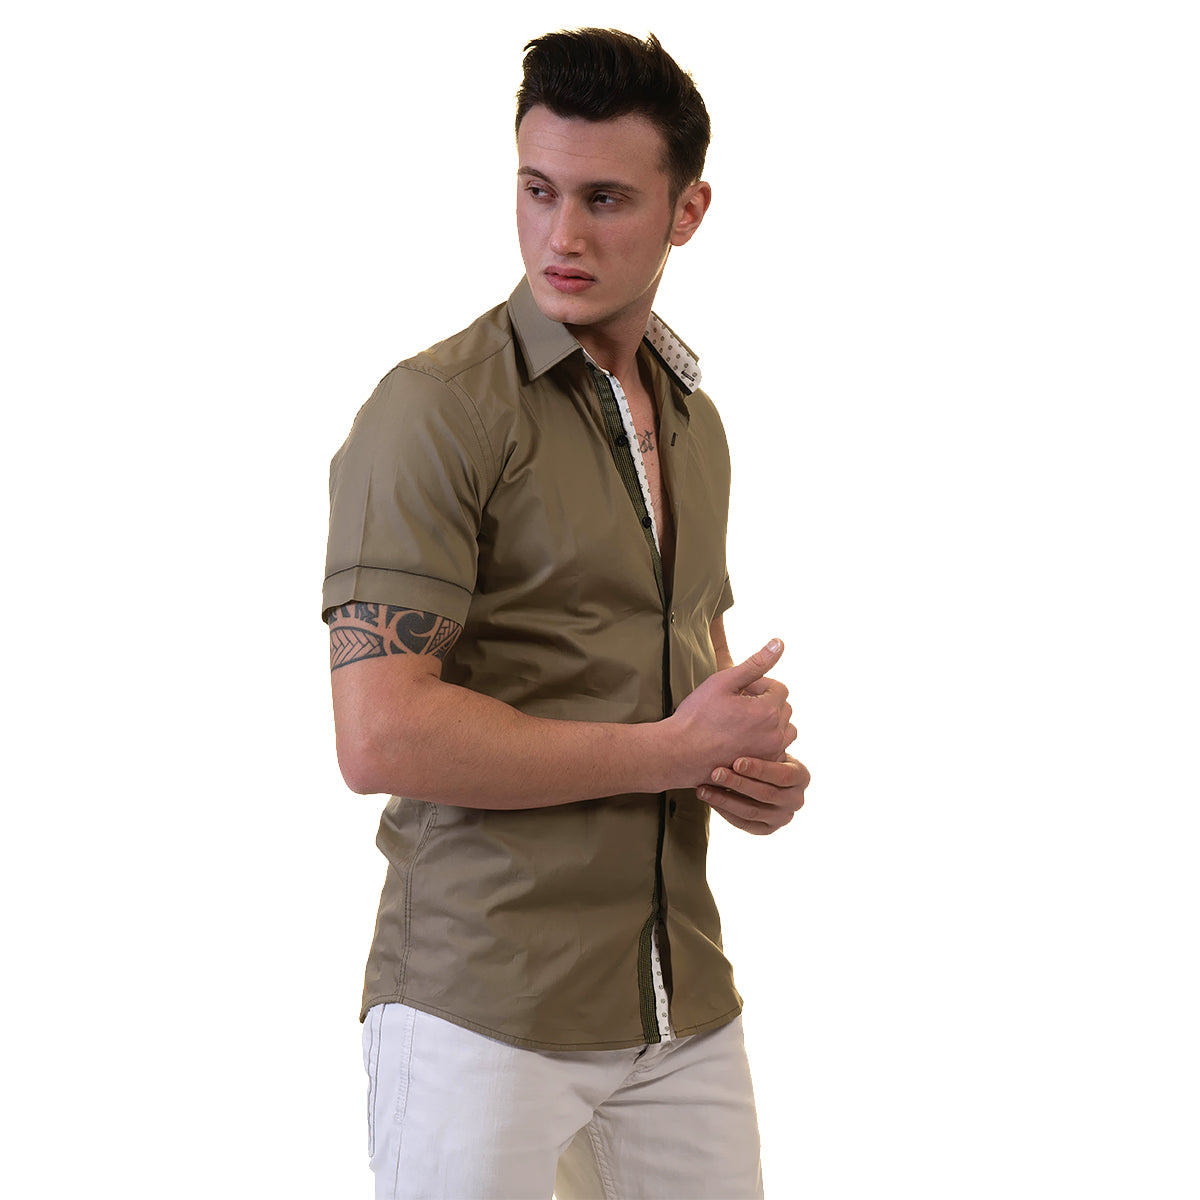 Green Mens Short Sleeve Button up Shirts - Tailored Slim Fit Cotton Dress Shirts